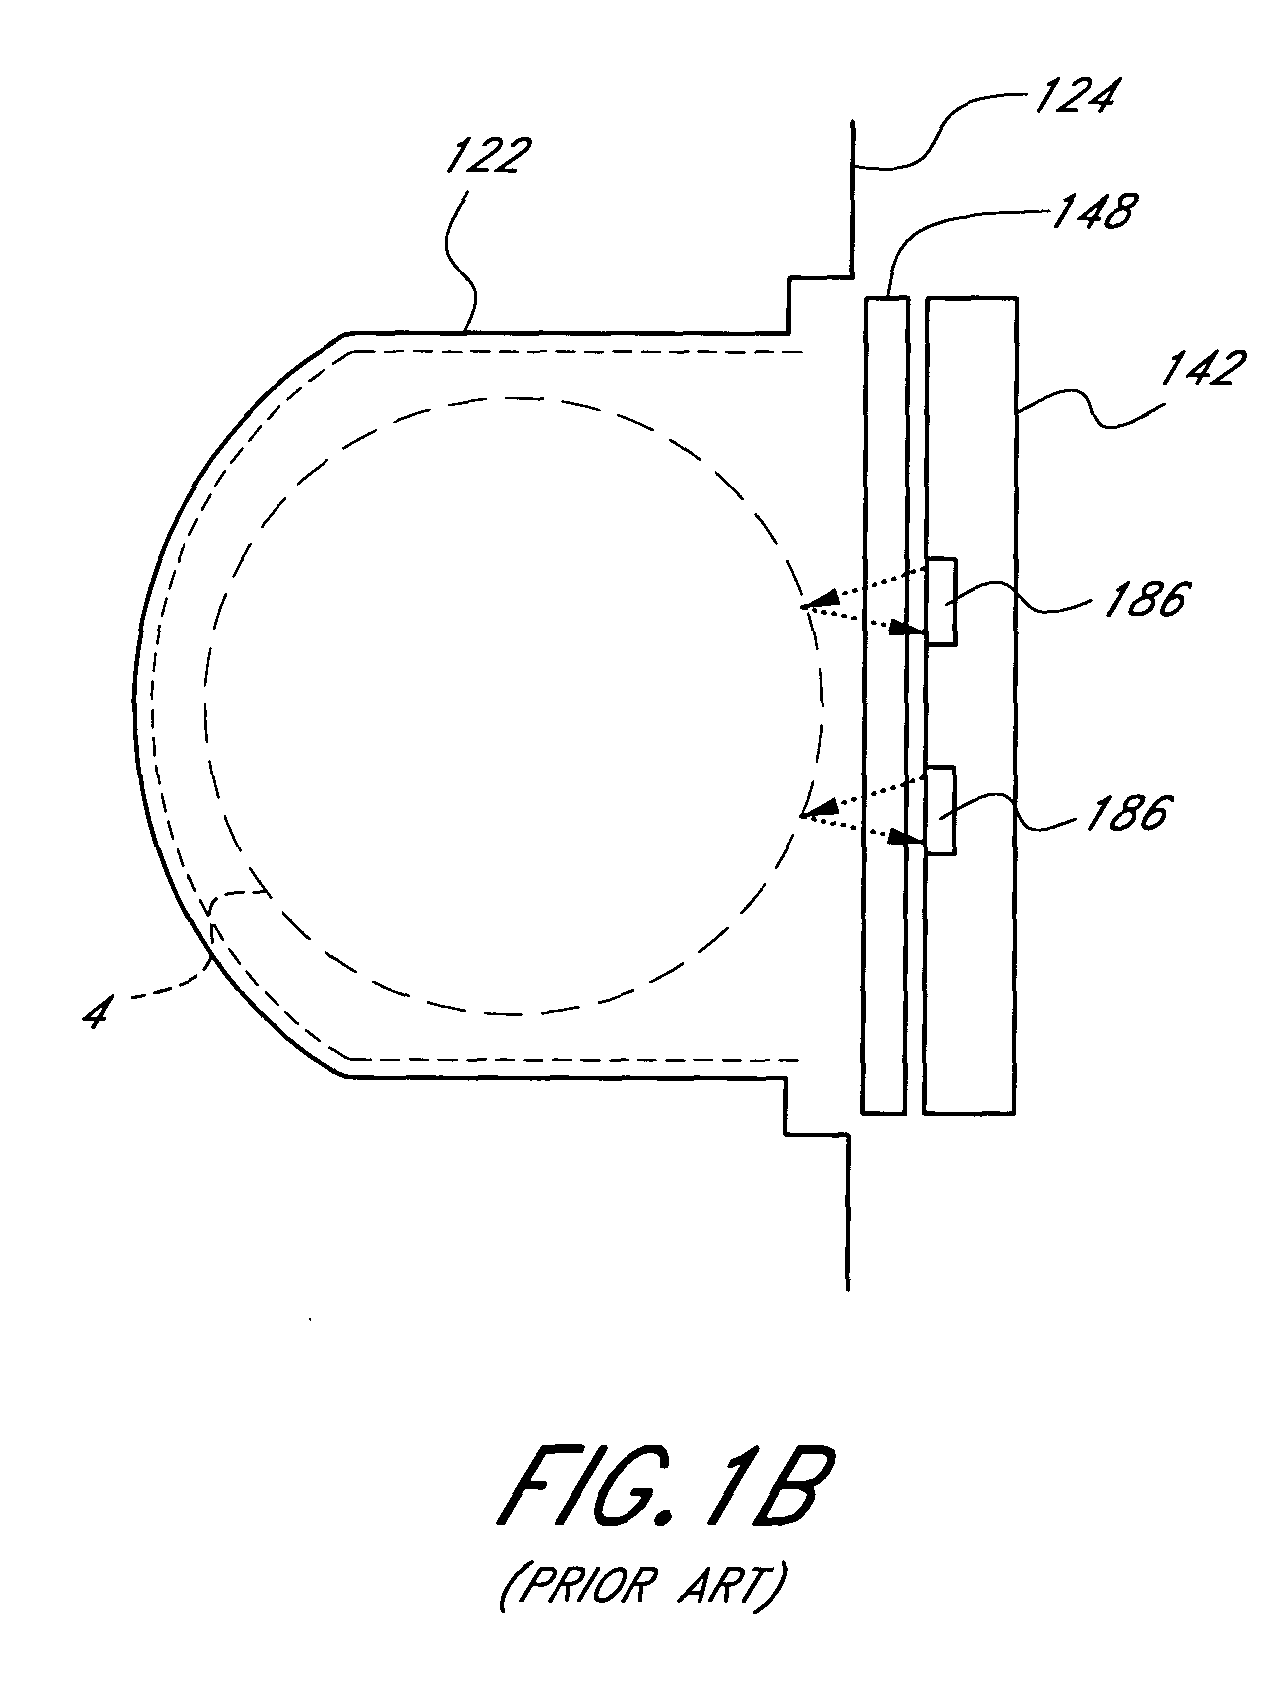 Method and apparatus for mapping of wafers located inside a closed wafer cassette